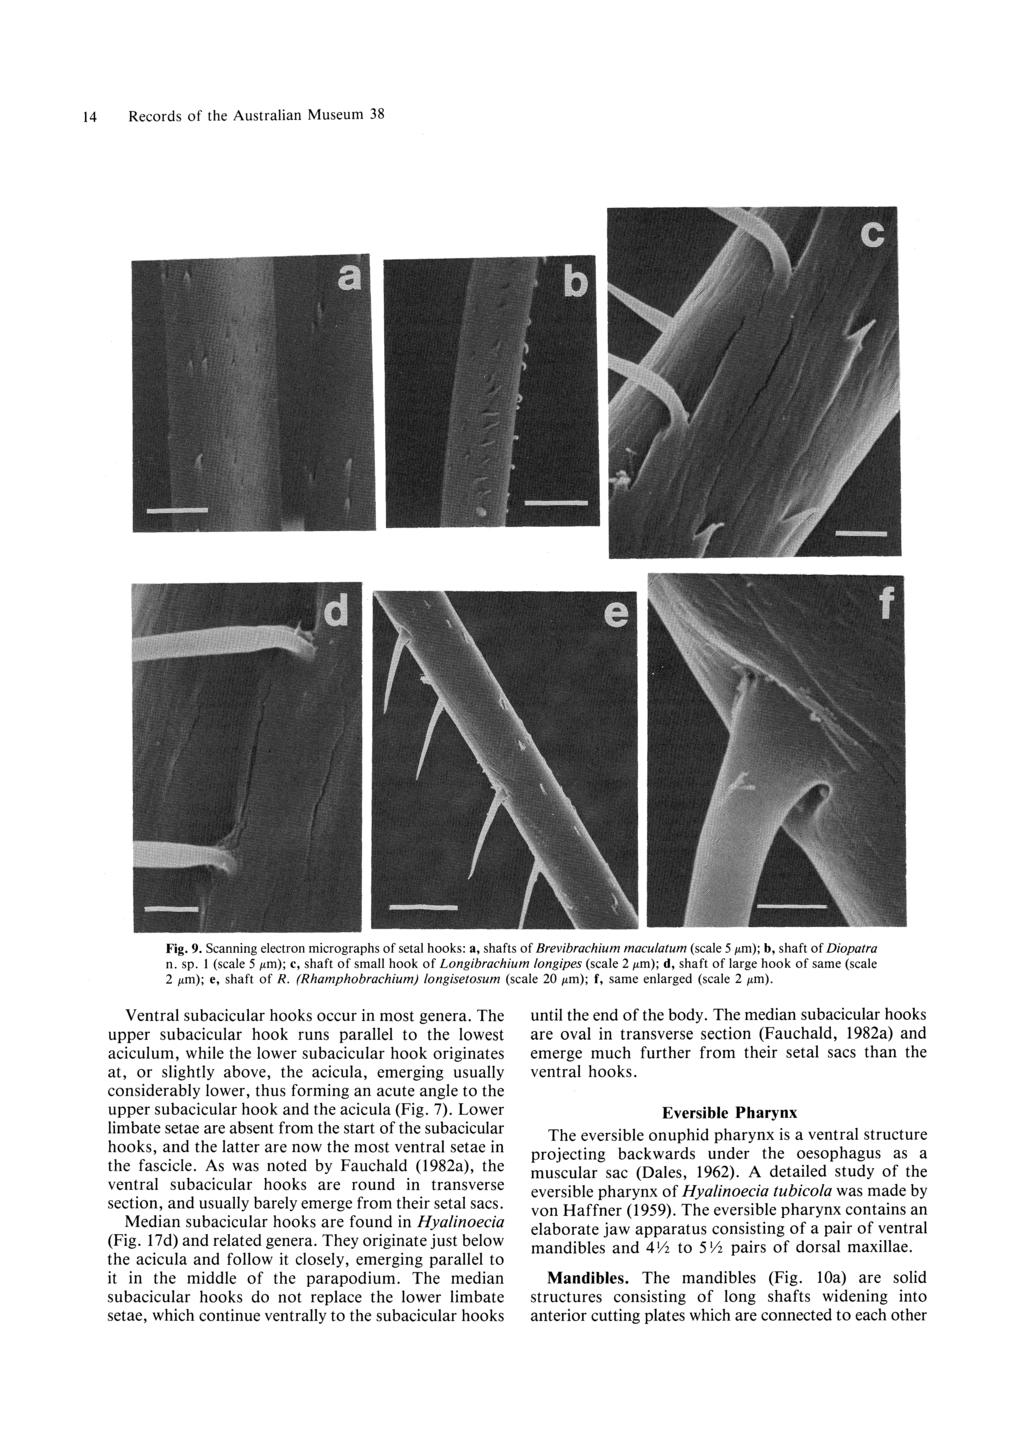 14 Records of the Australian Museum 38 Fig. 9. Scanning electron micrographs of setal hooks: a, shafts of Brevibrachium maculatum (scale 5 f'm); b, shaft of Diopatra n. sp.